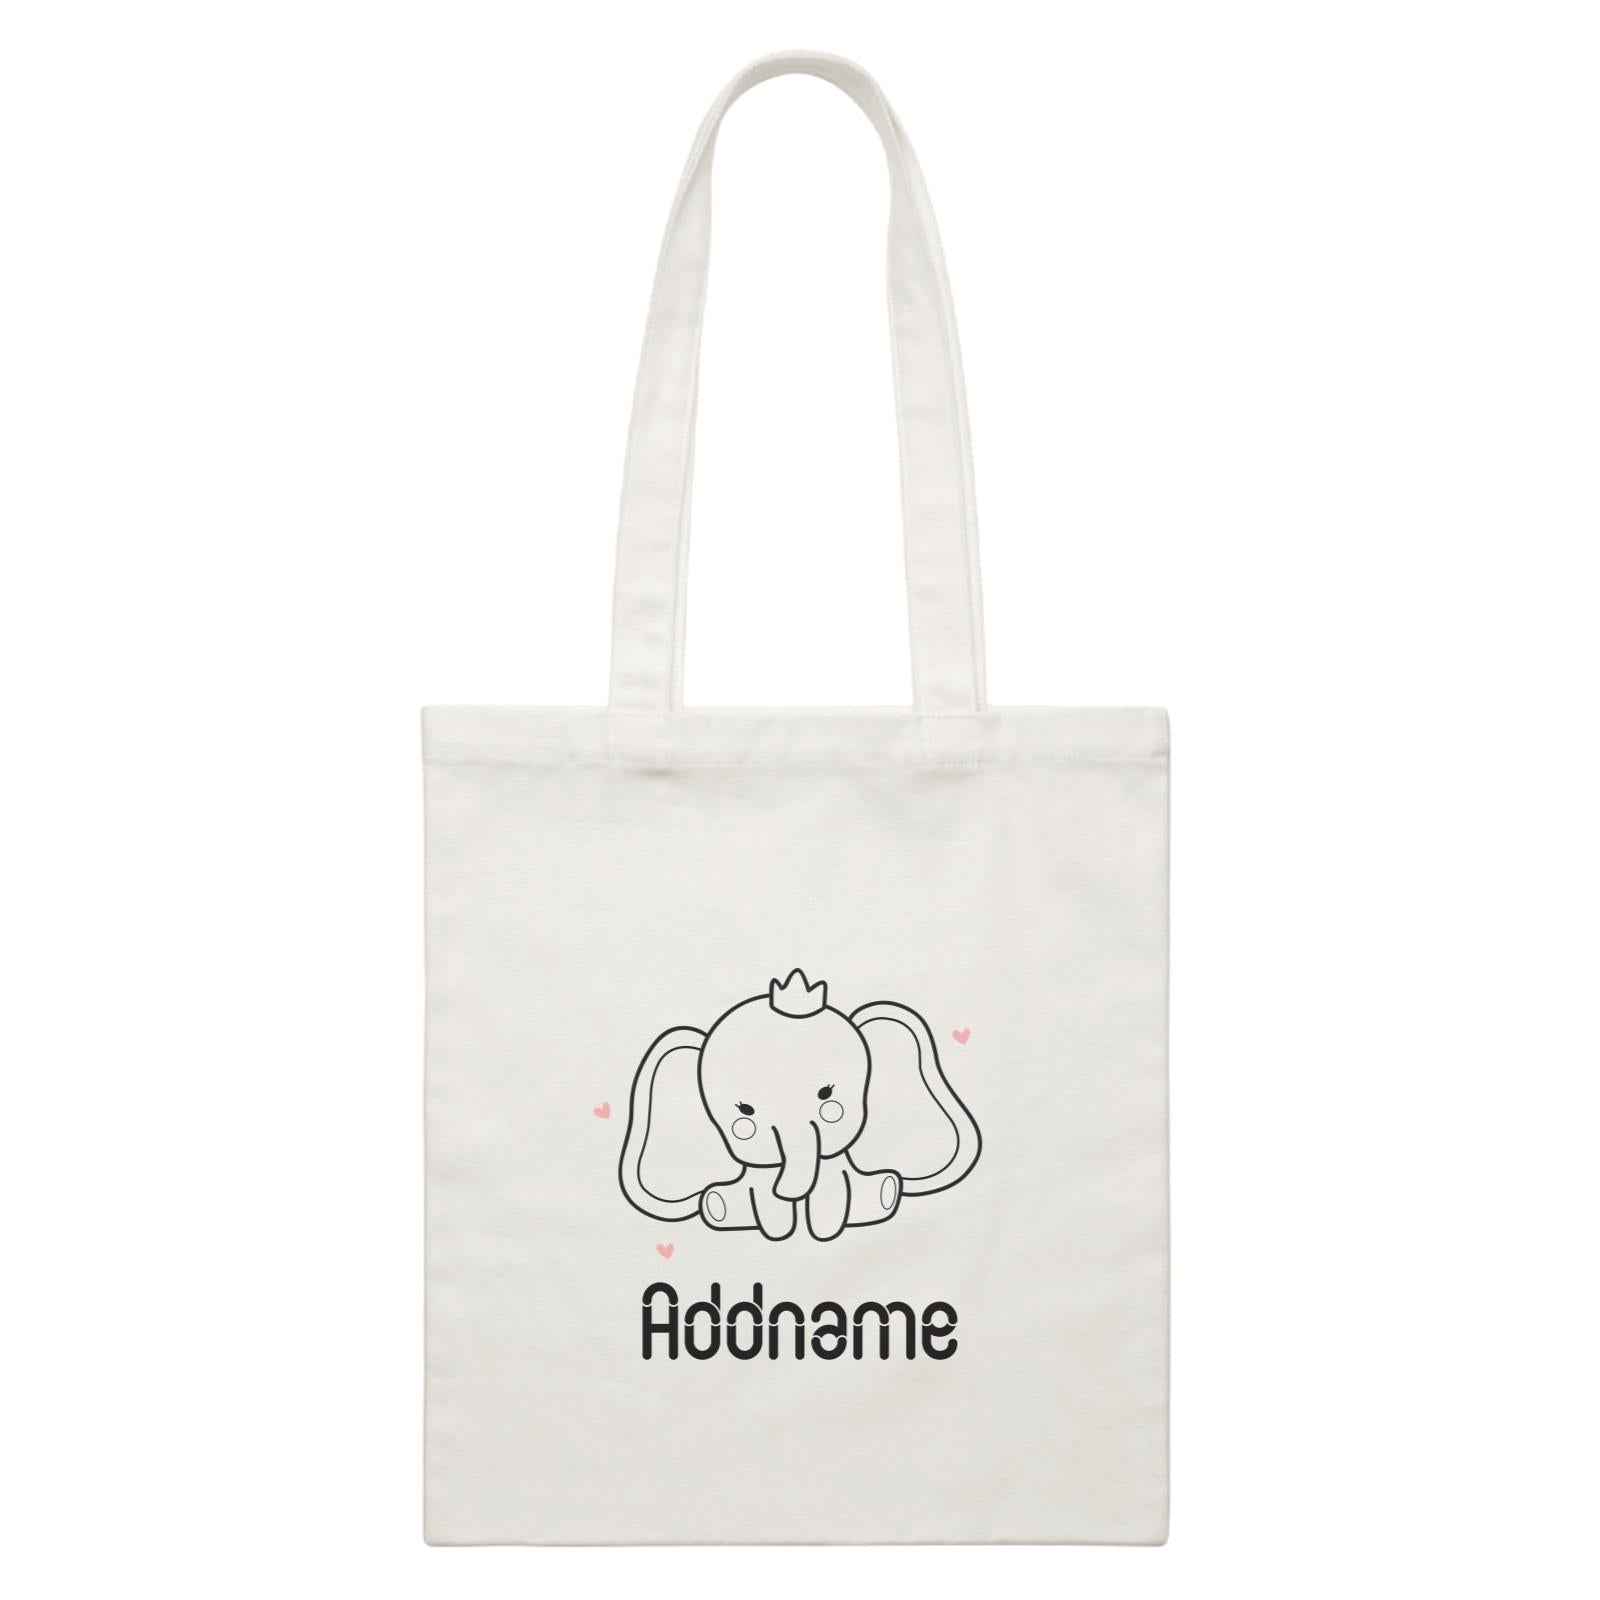 Coloring Outline Cute Hand Drawn Animals Elephants Baby Elephants With Crown Addname White White Canvas Bag